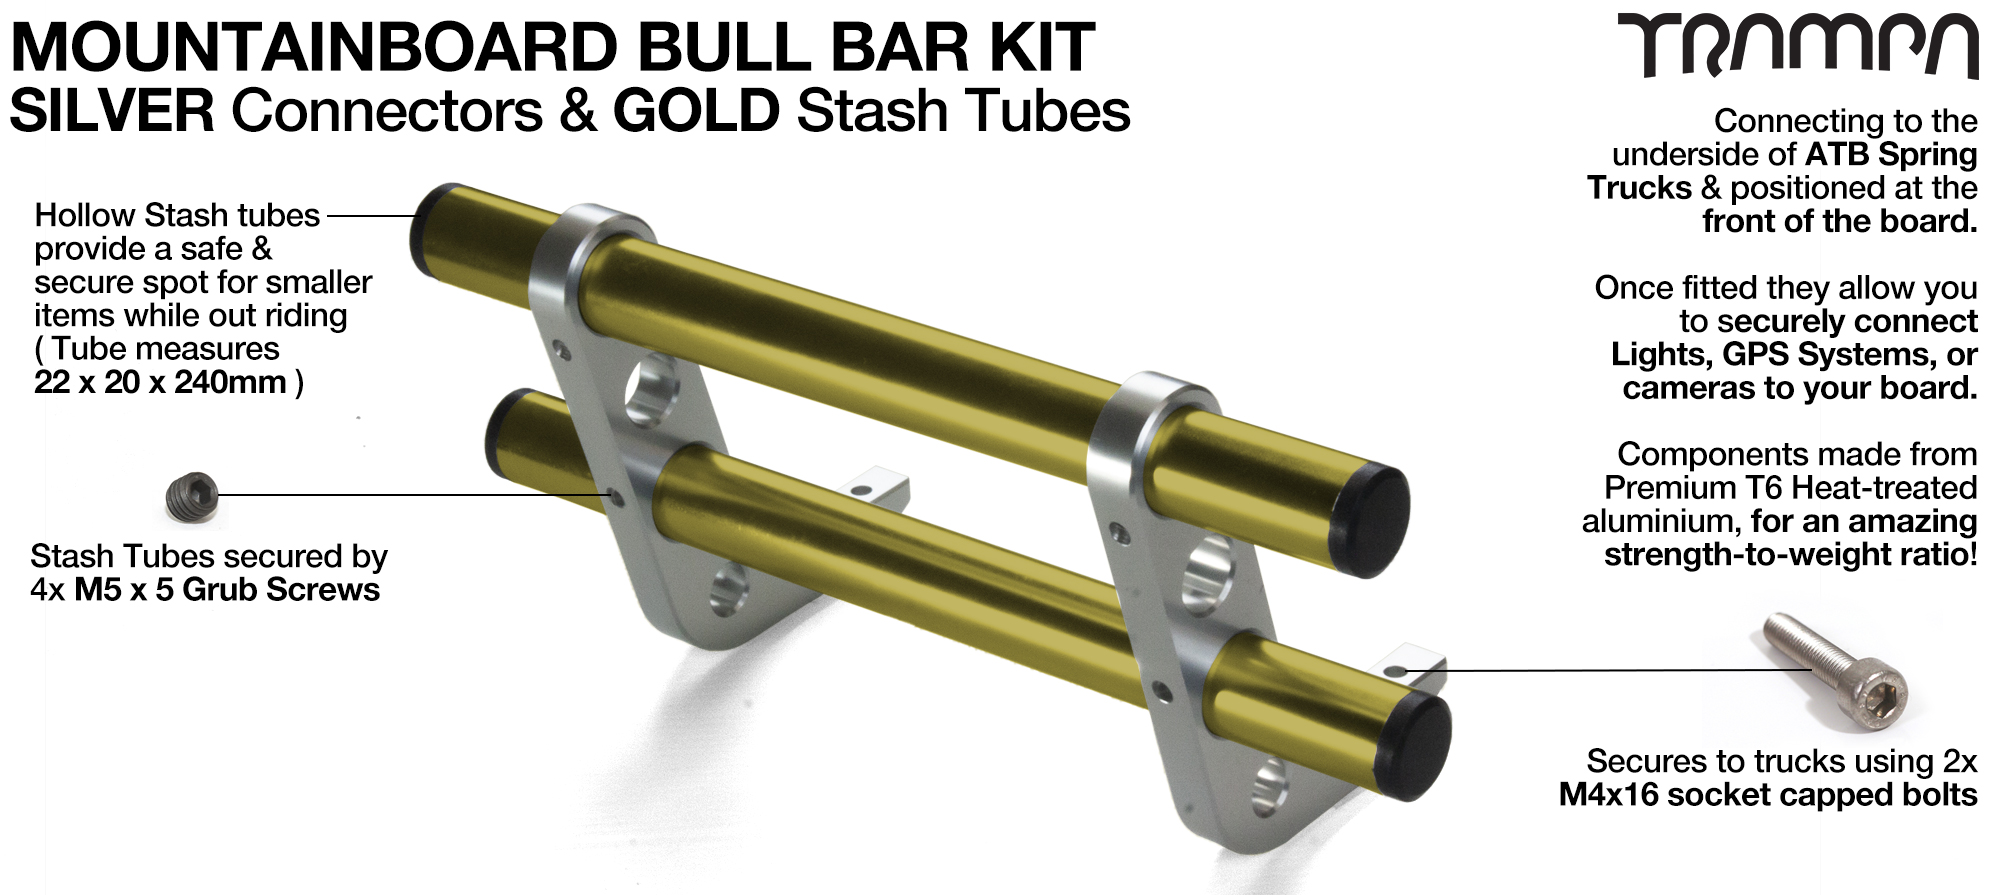 SILVER Uprights & GOLD Crossbar BULL BARS for MOUNTAINBOARDS T6 Heat Treated CNC'd Aluminium Uprights, with Hollow Aluminium Stash Tubes with Rubber end bungs 